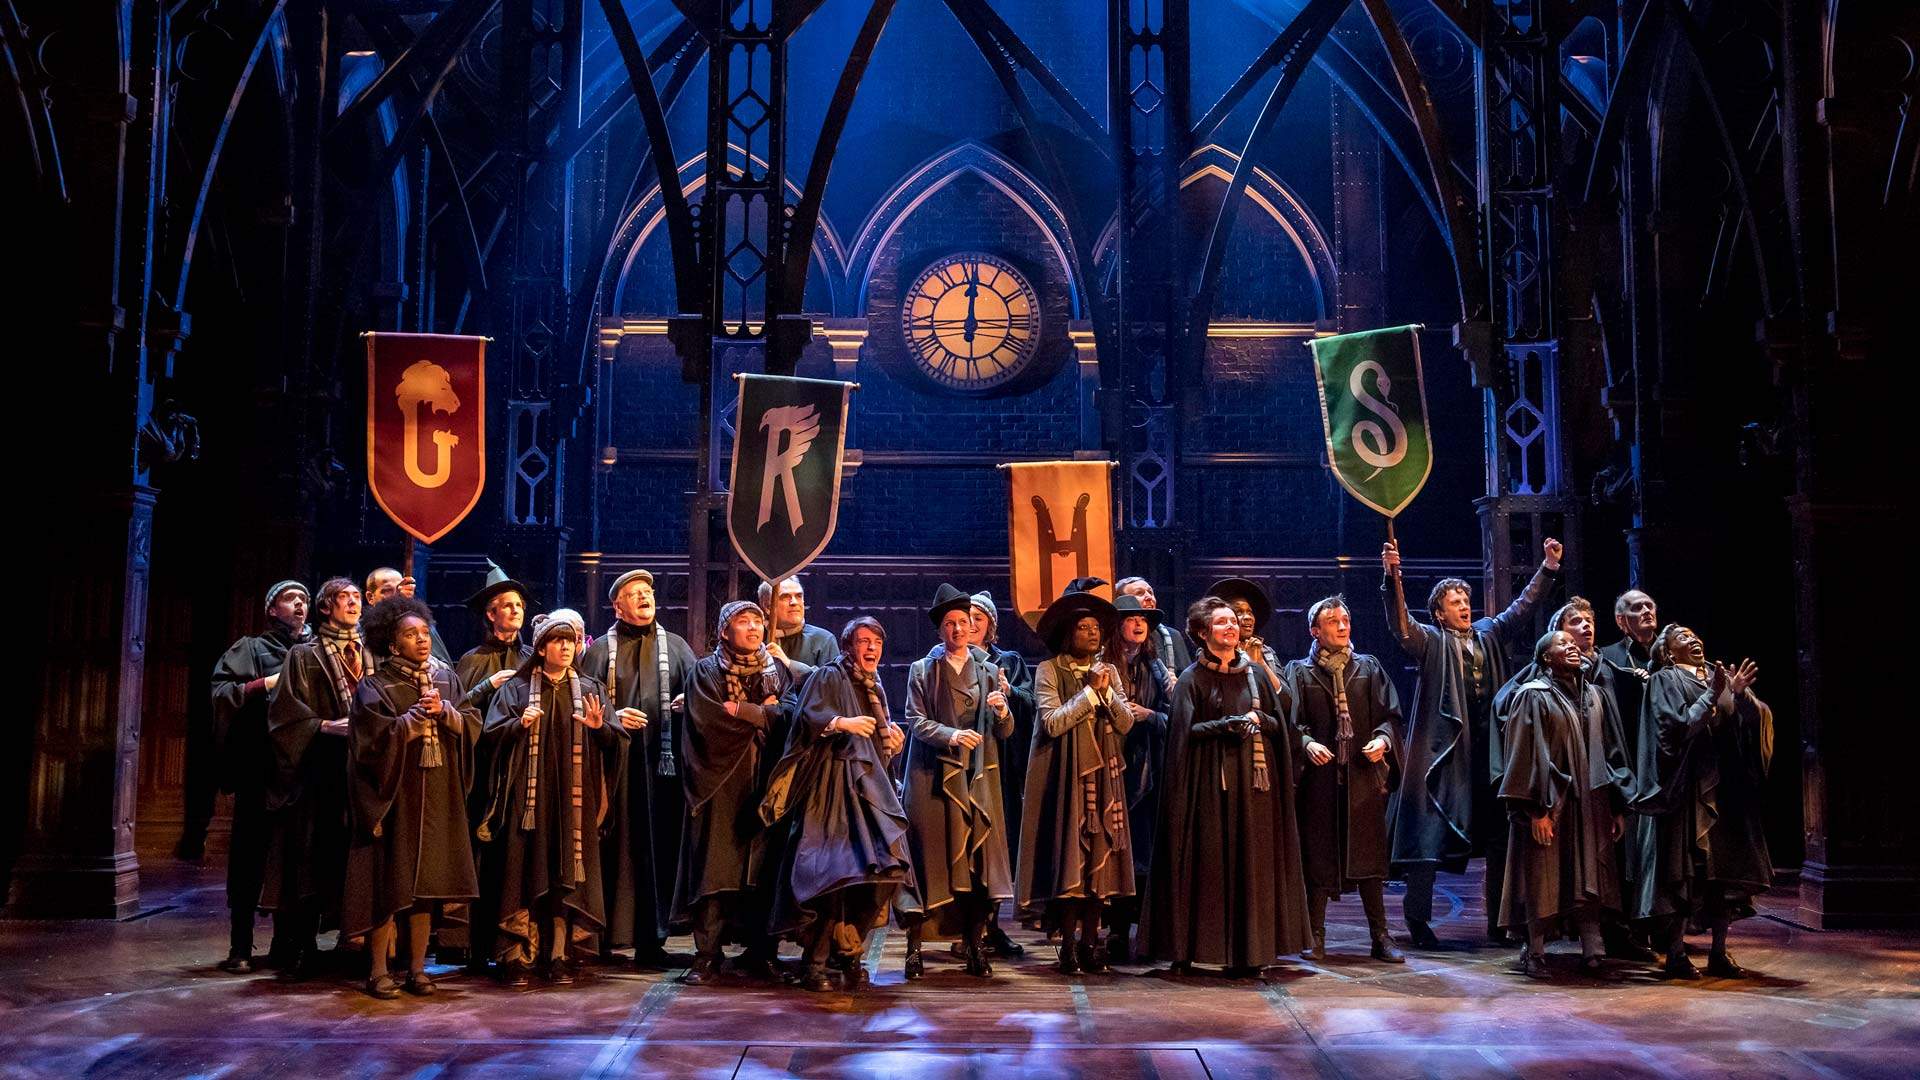 JK Rowling's Stage Production 'Harry Potter and the Cursed Child' Is Coming to Melbourne